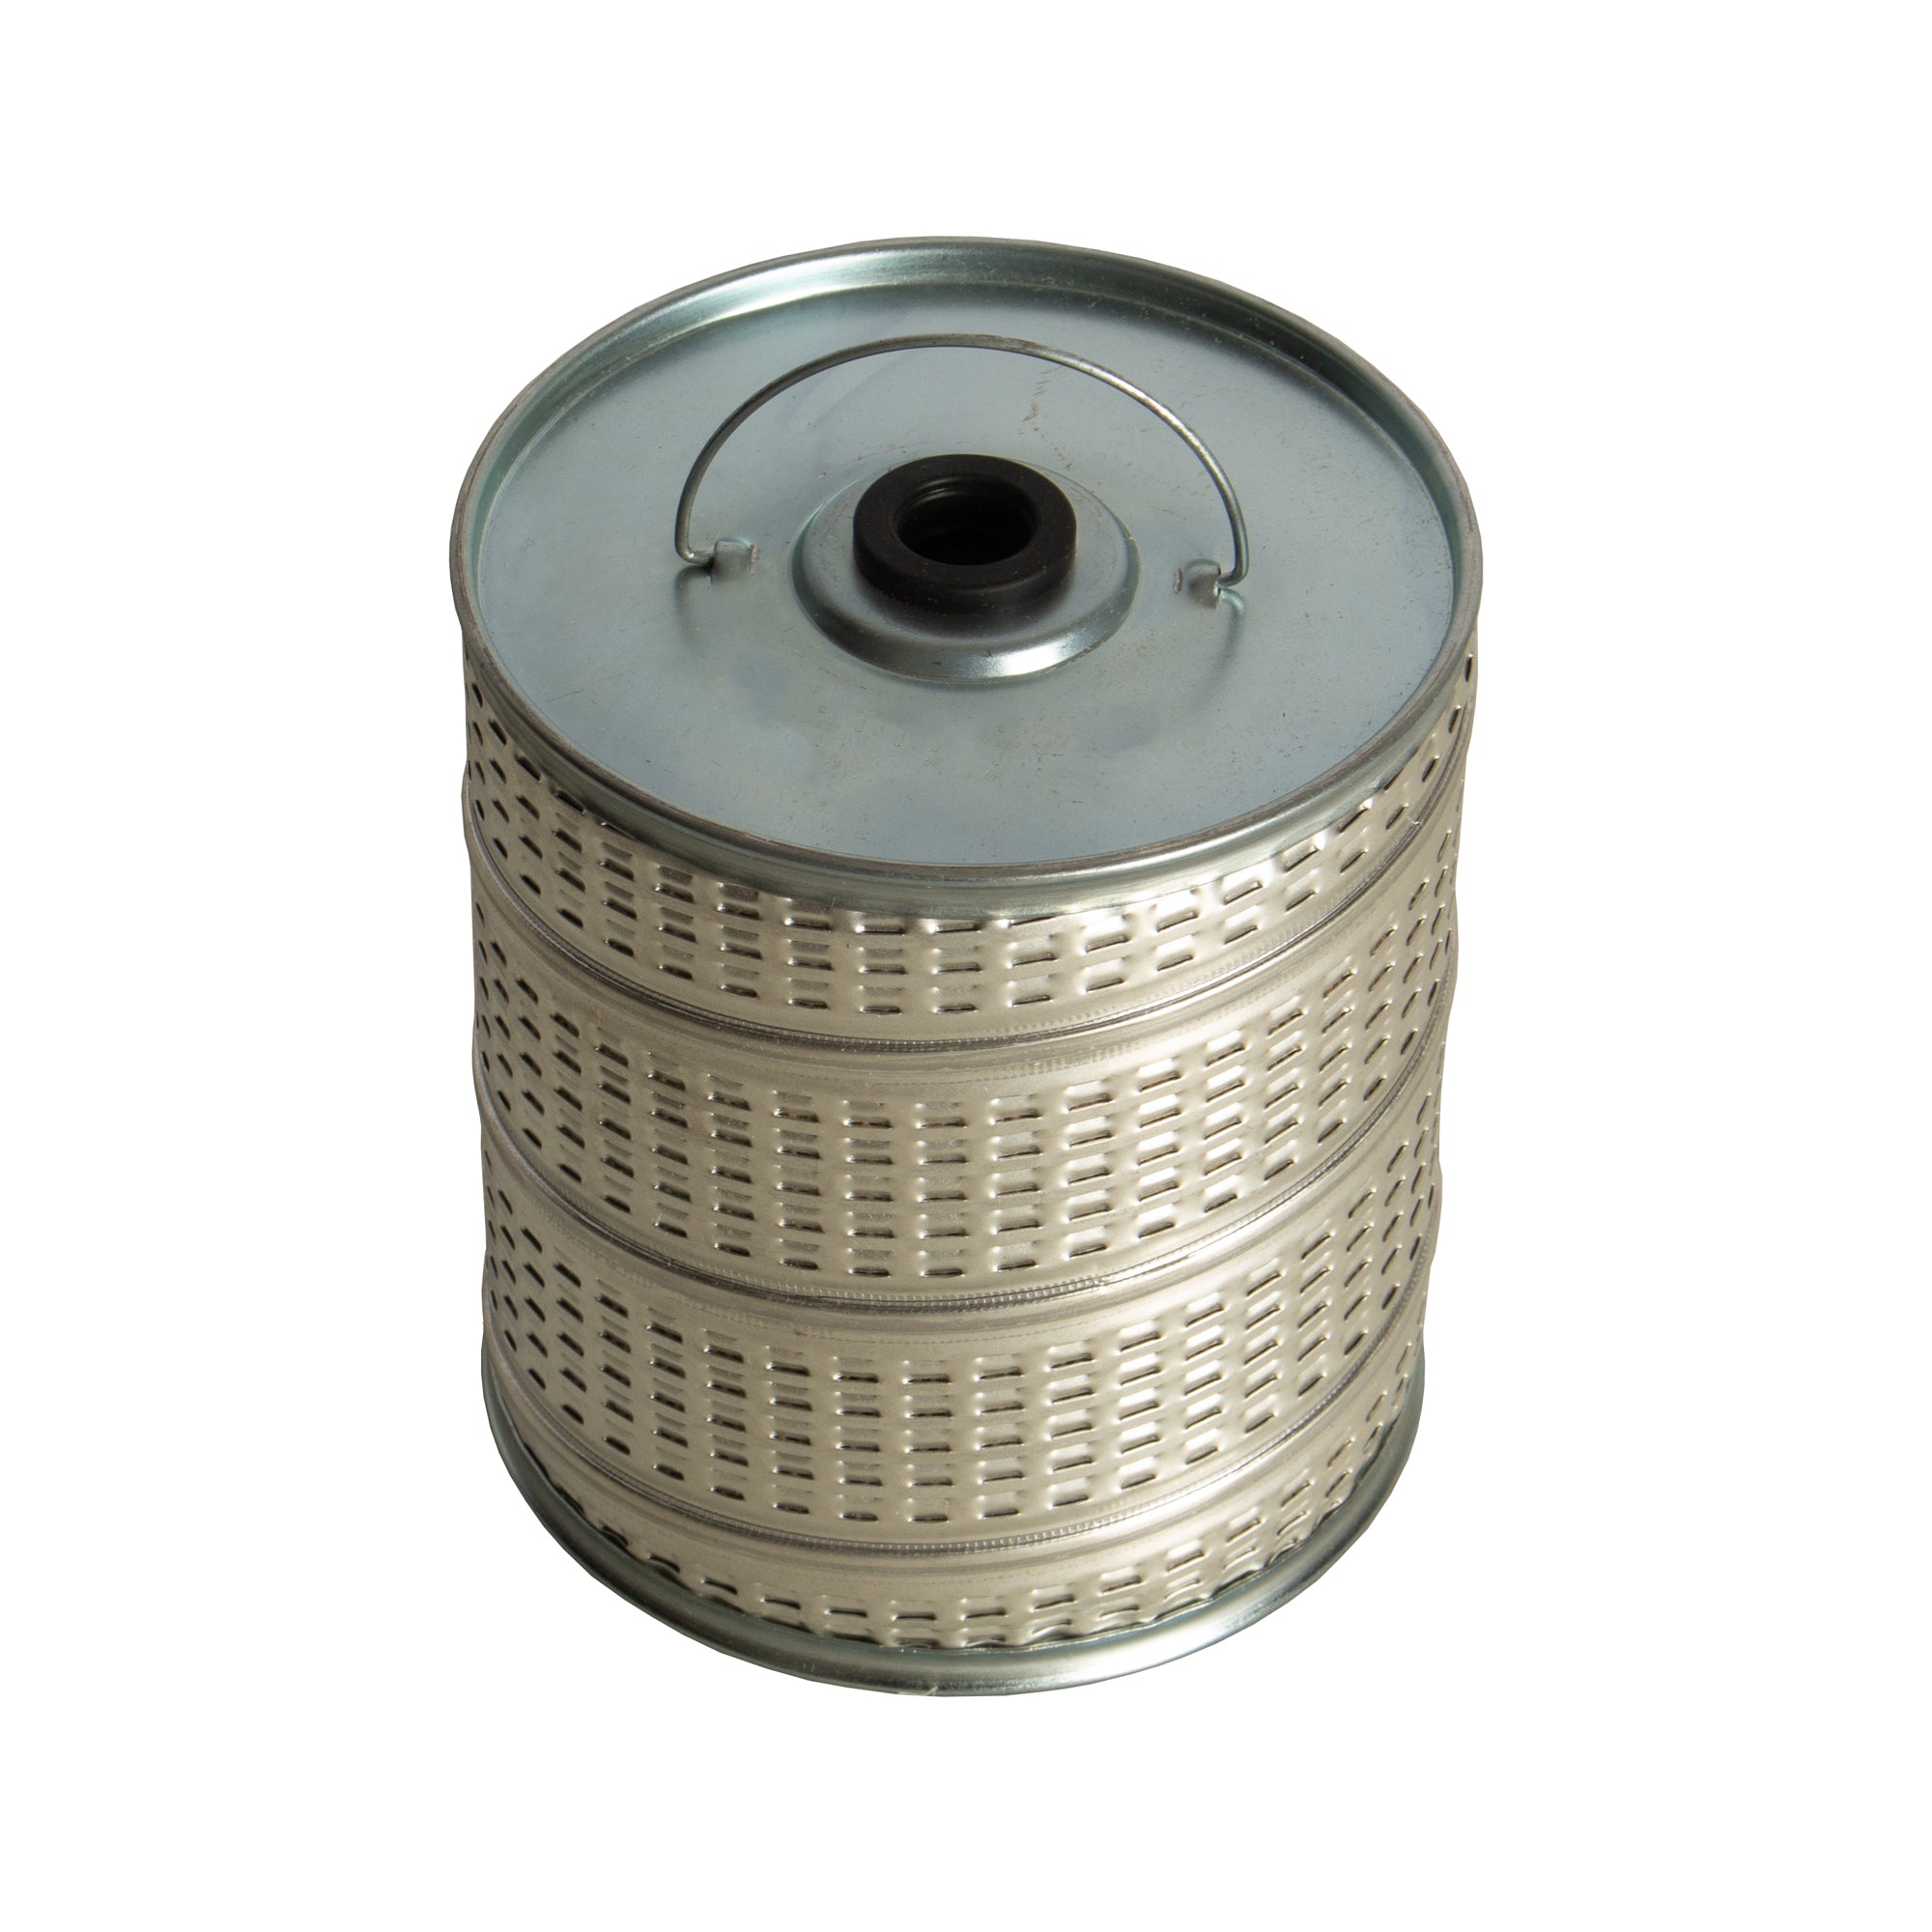 Oil Filter Replacement for WILLY'S JEEP WO-A1236 Ford GPW Willys MB